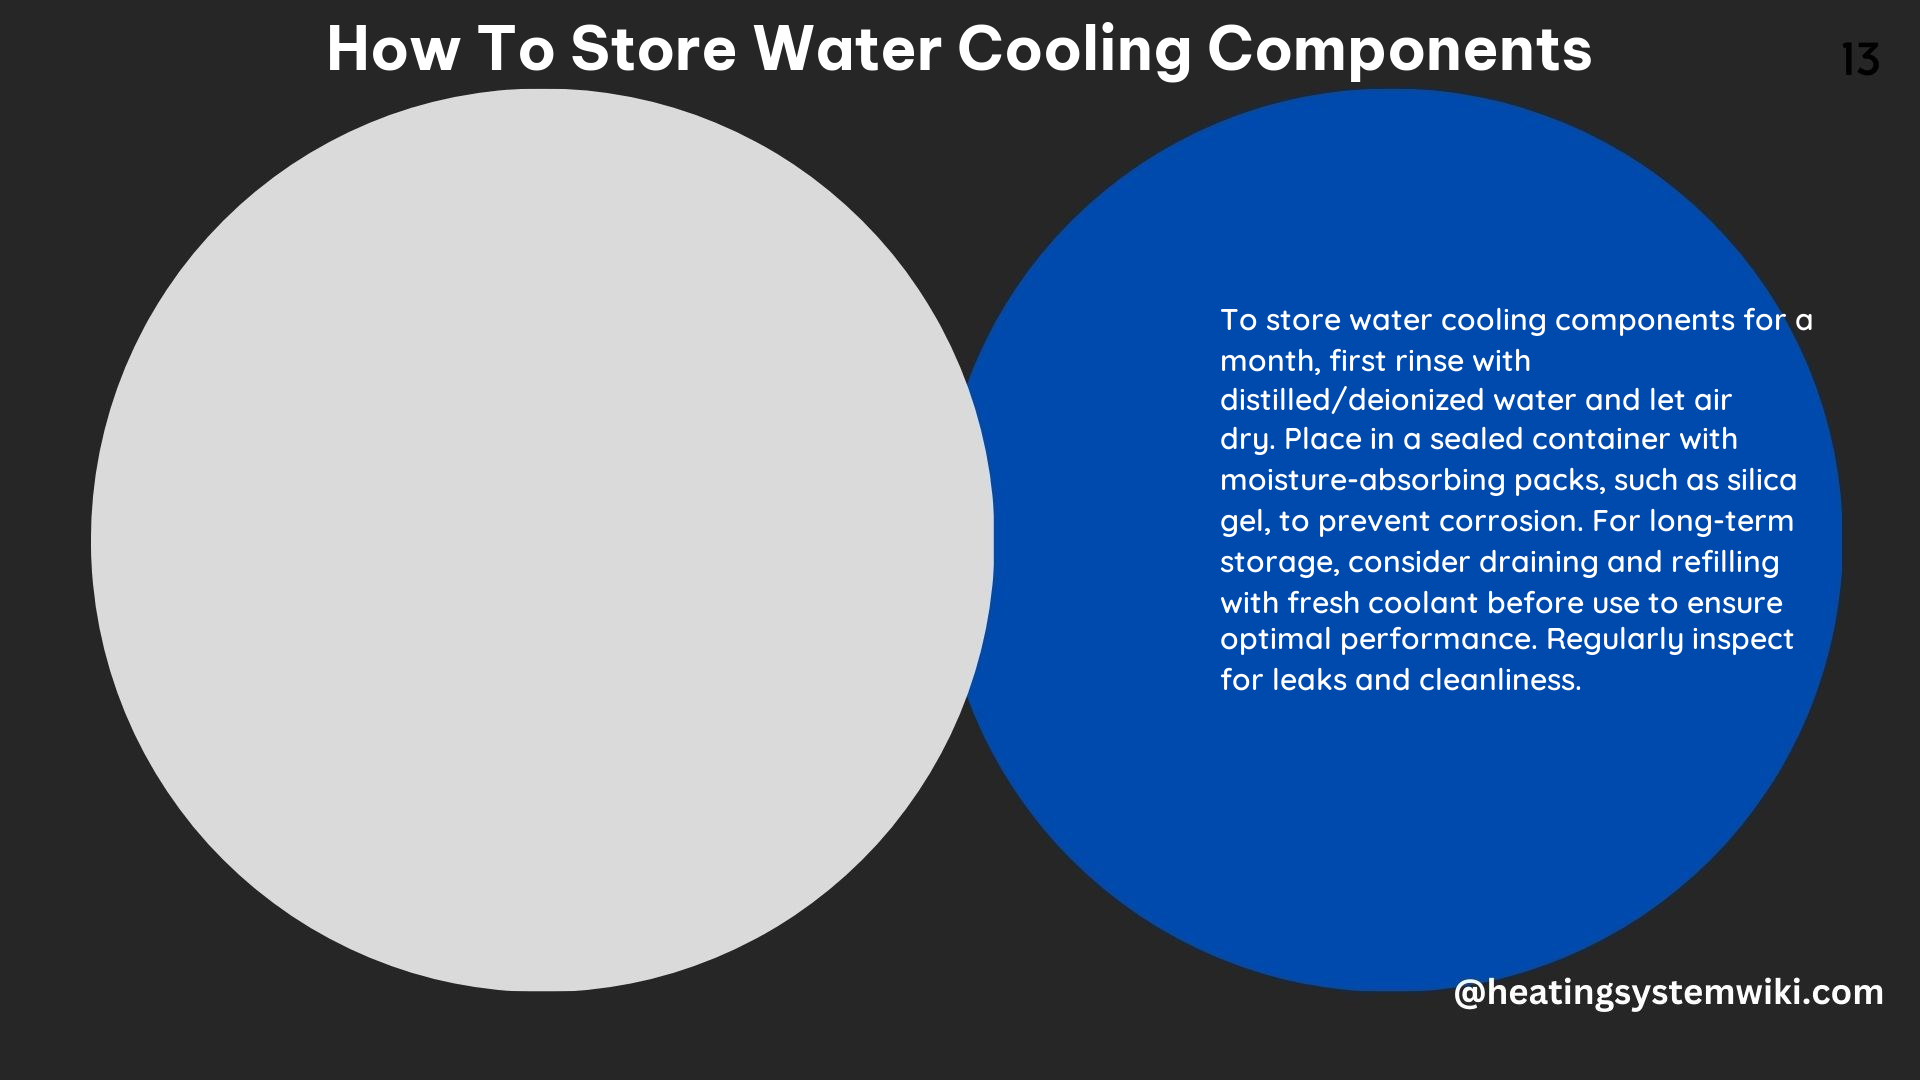 How to Store Water Cooling Components